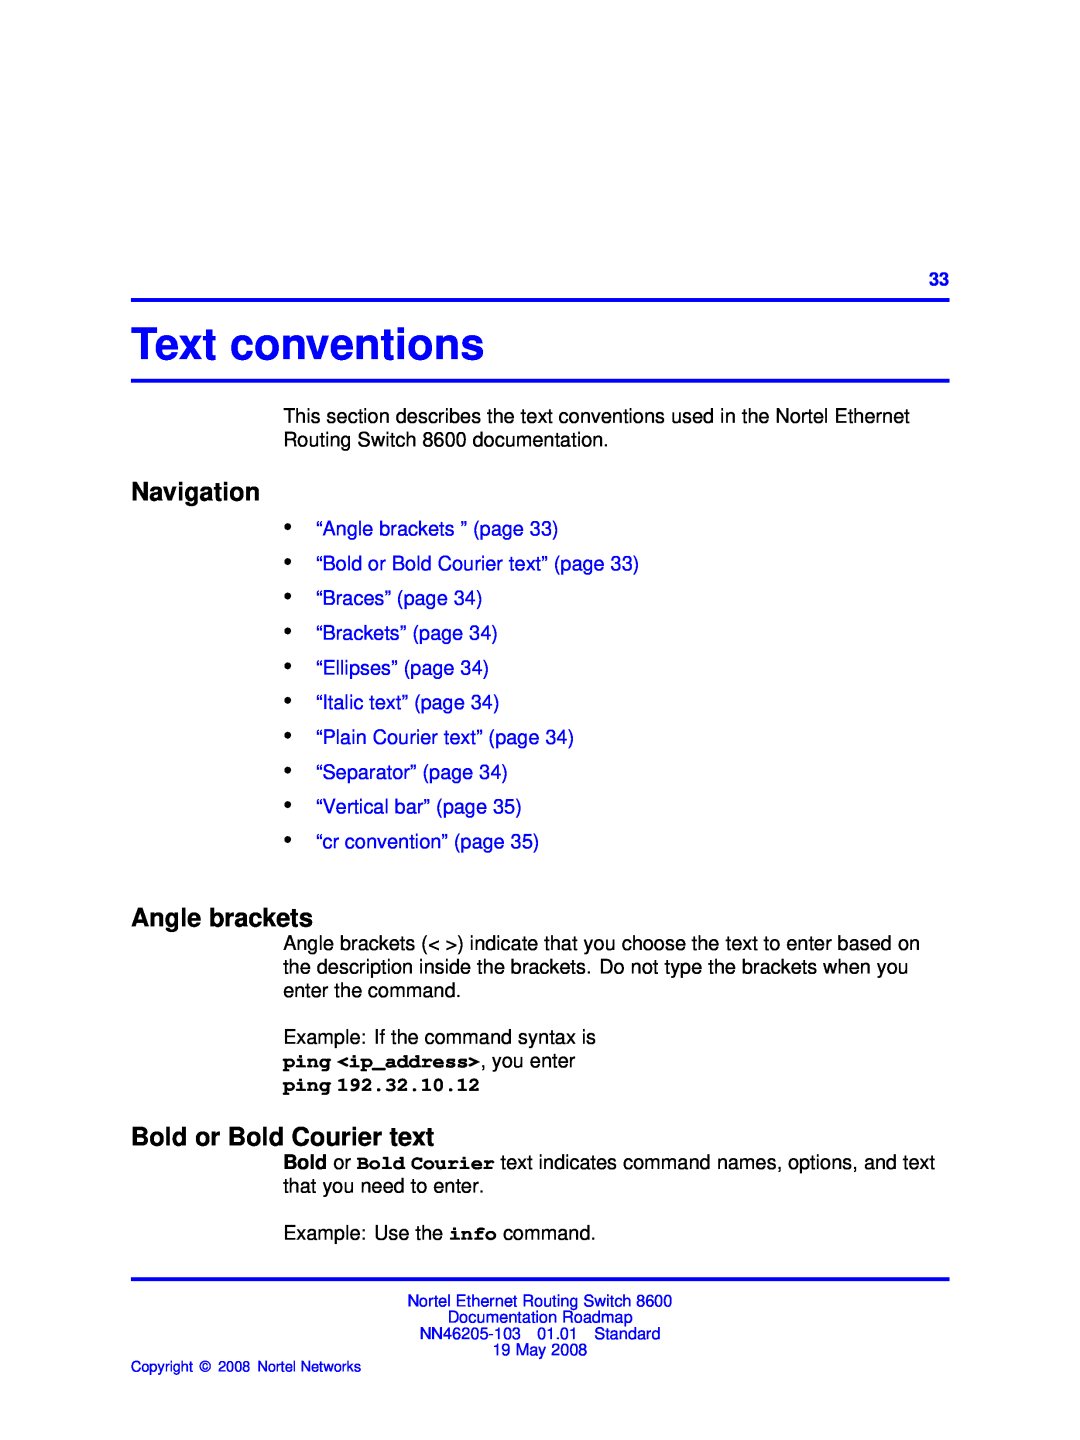 Nortel Networks 8600 Text conventions, Angle brackets, Bold or Bold Courier text, “cr convention” page, ping, Navigation 